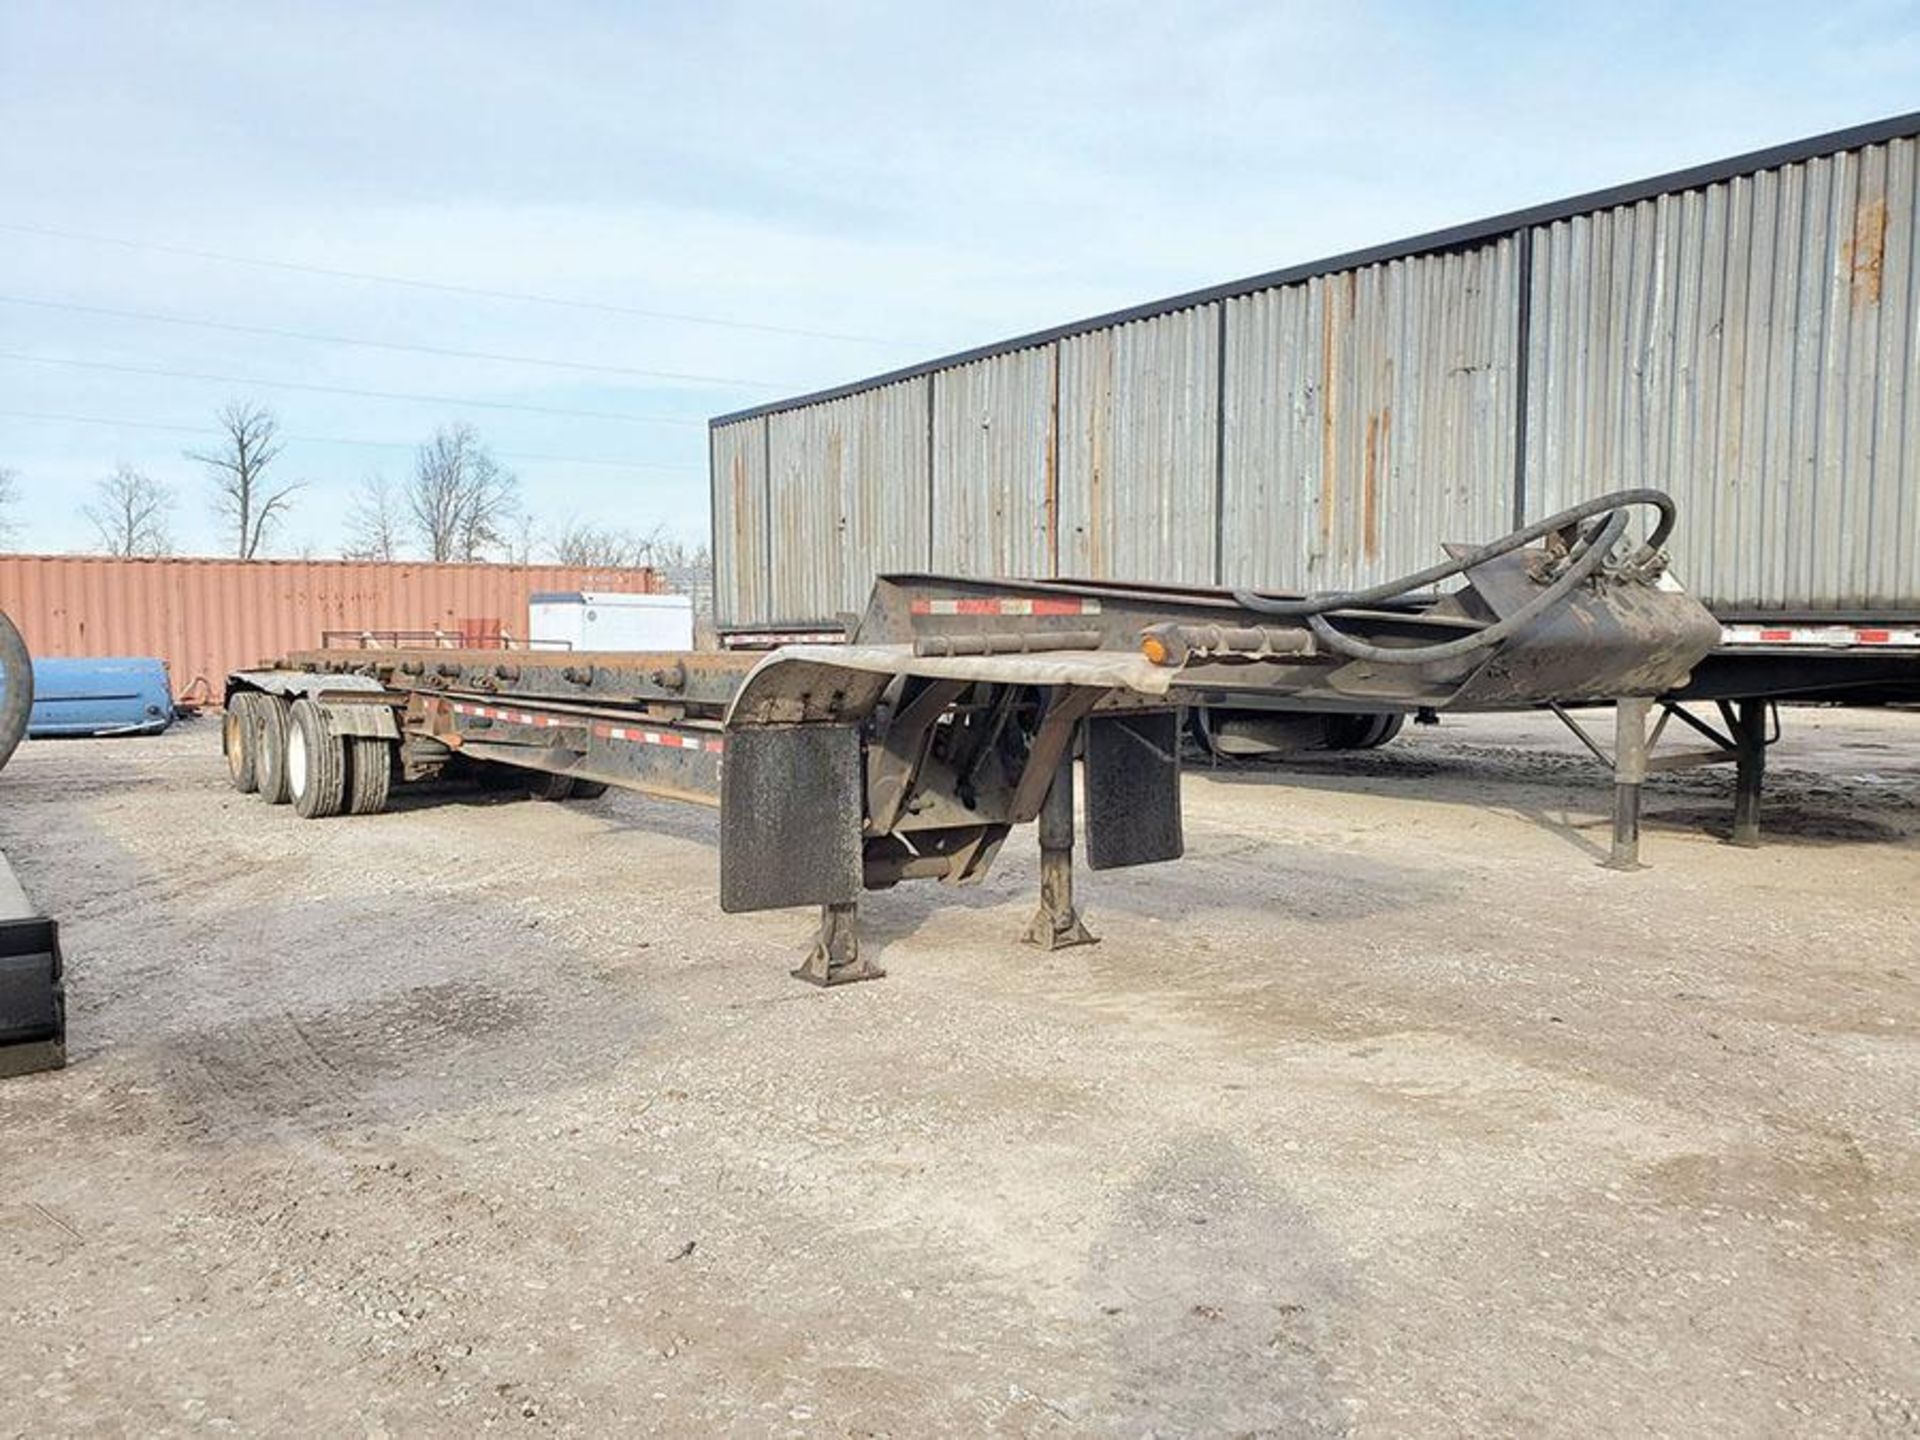 1994 48' Benlee Roll Off Container Trailer, Model TA60DD43, Vin 1B9B14339RA180970, Spread Axle, Air - Image 2 of 4